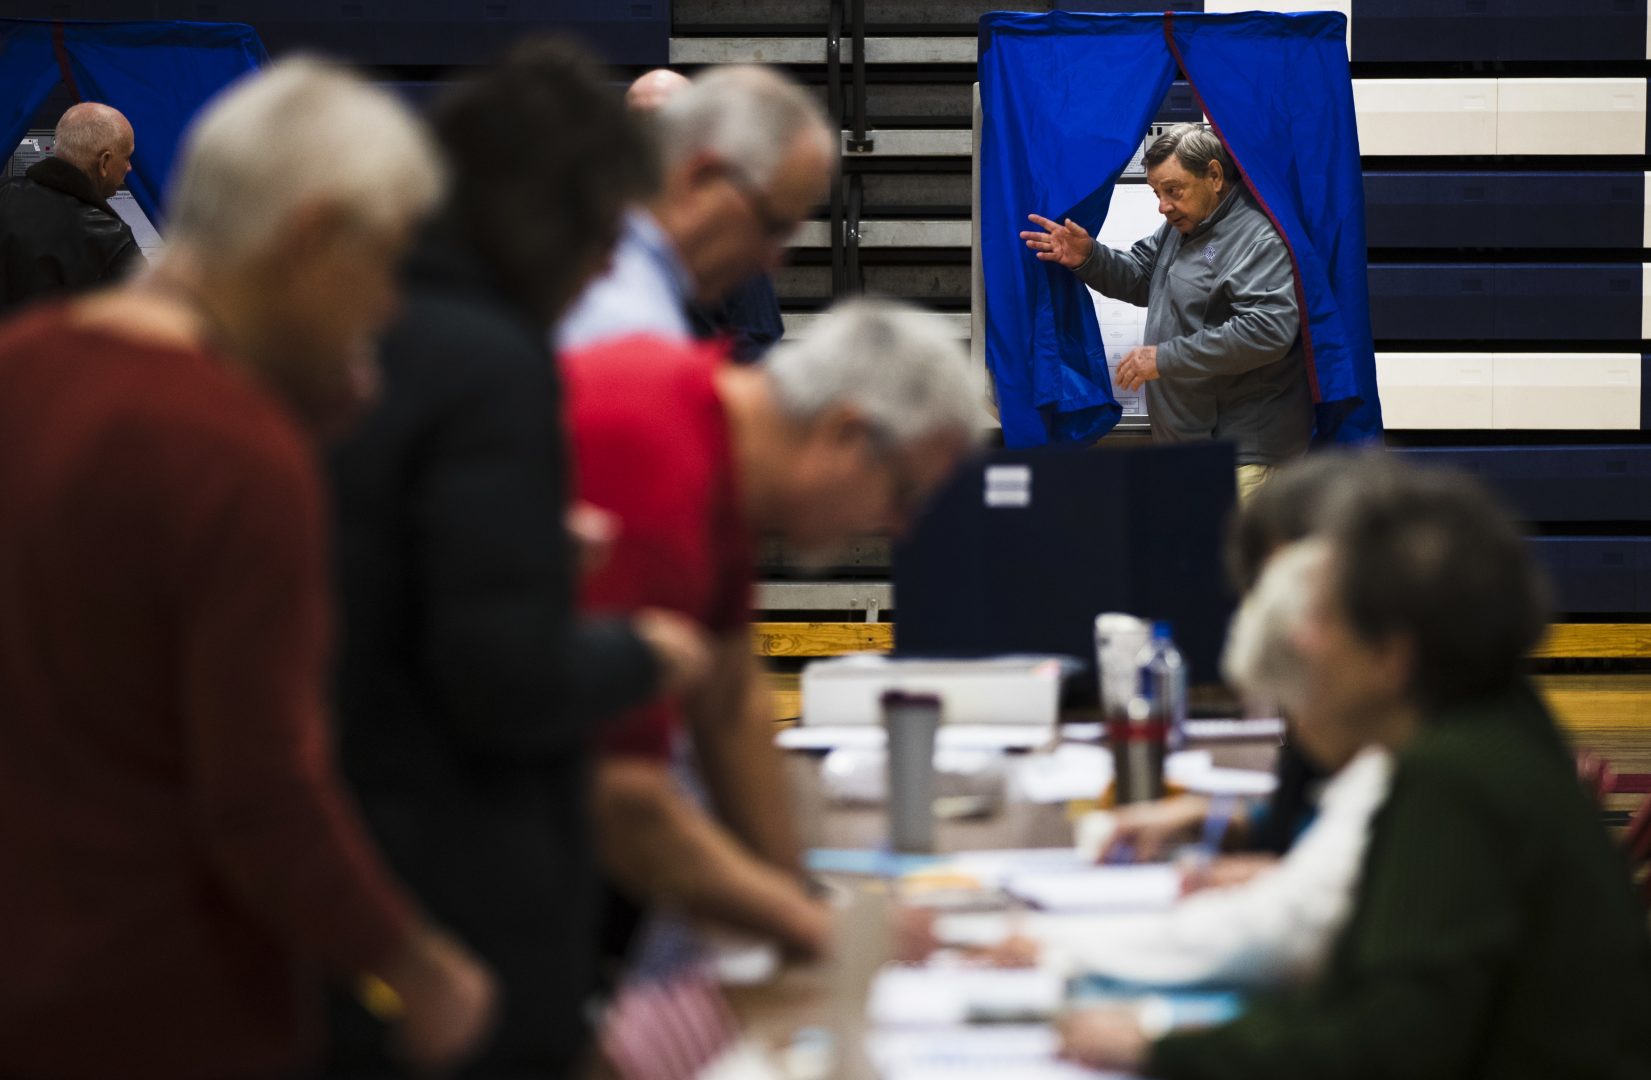 A voter steps from the voting booth after casting his ballot in Doylestown, Pa., Tuesday, Nov. 6, 2018. 